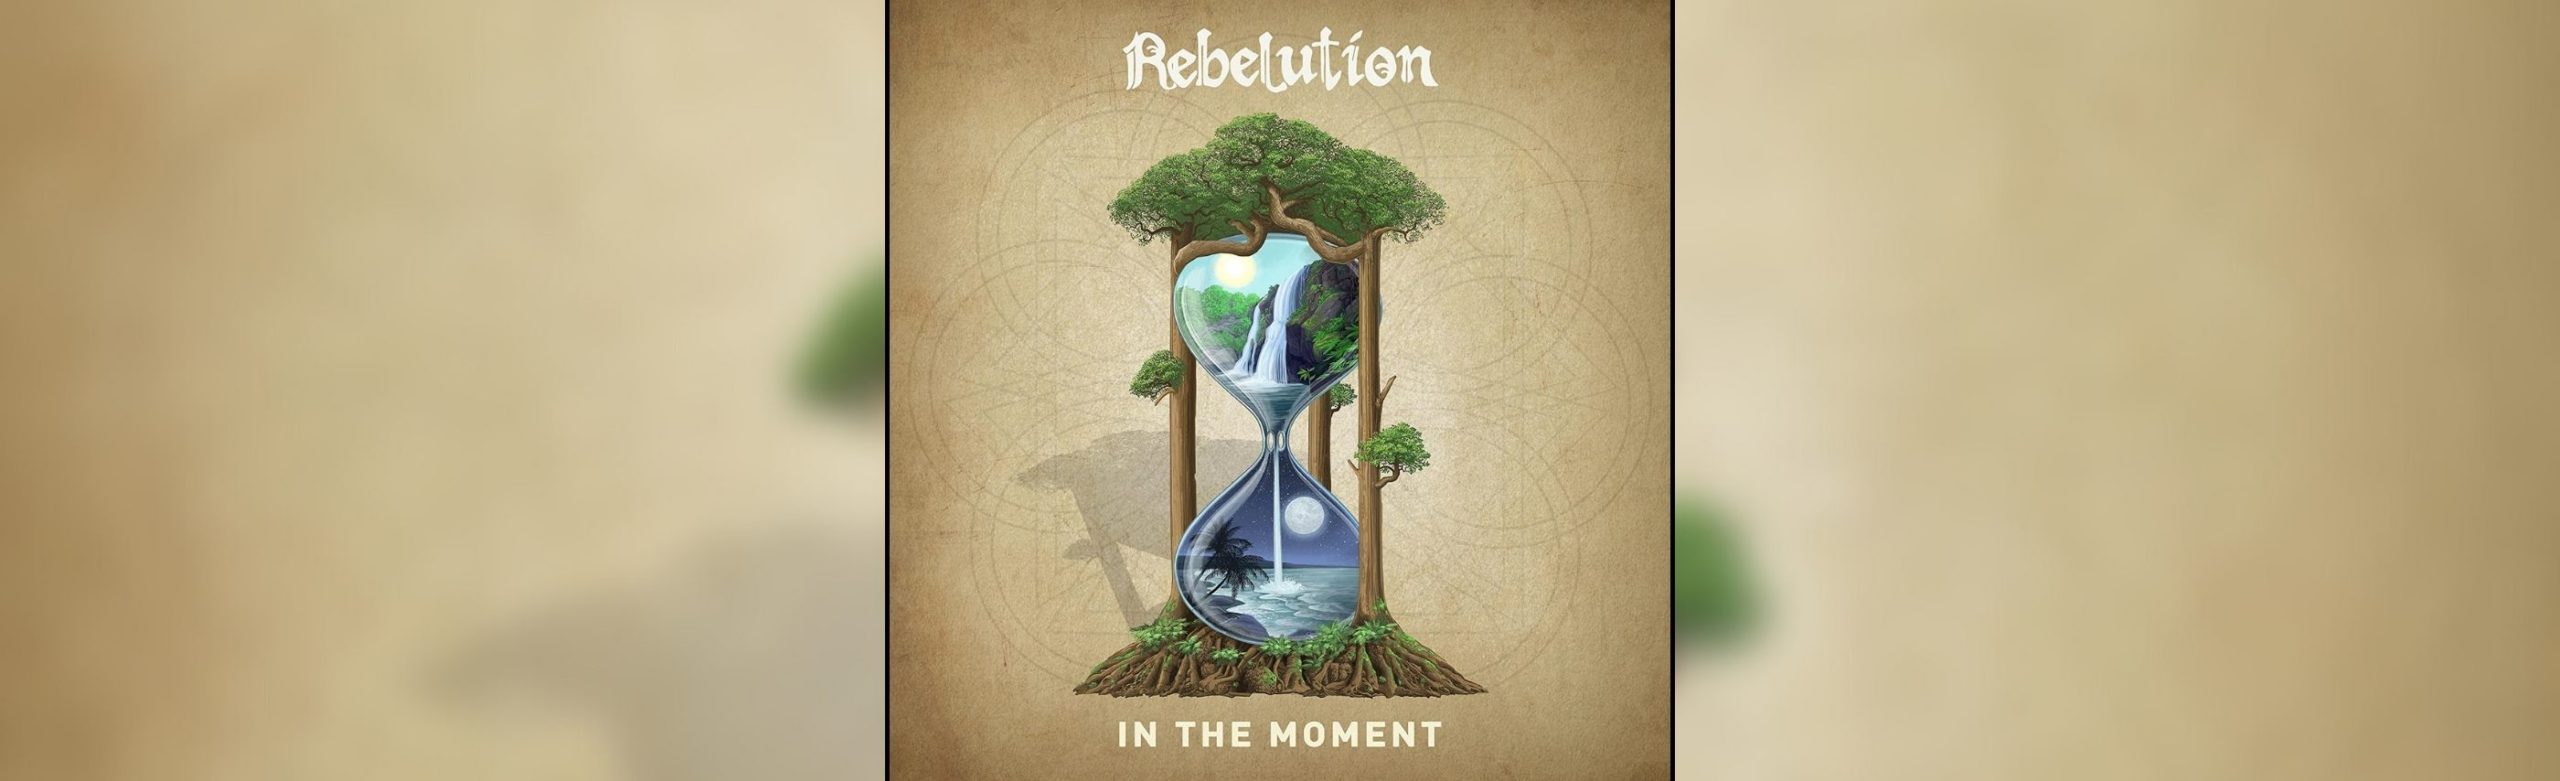 Rebelution Stays “In the Moment” on New Album Image